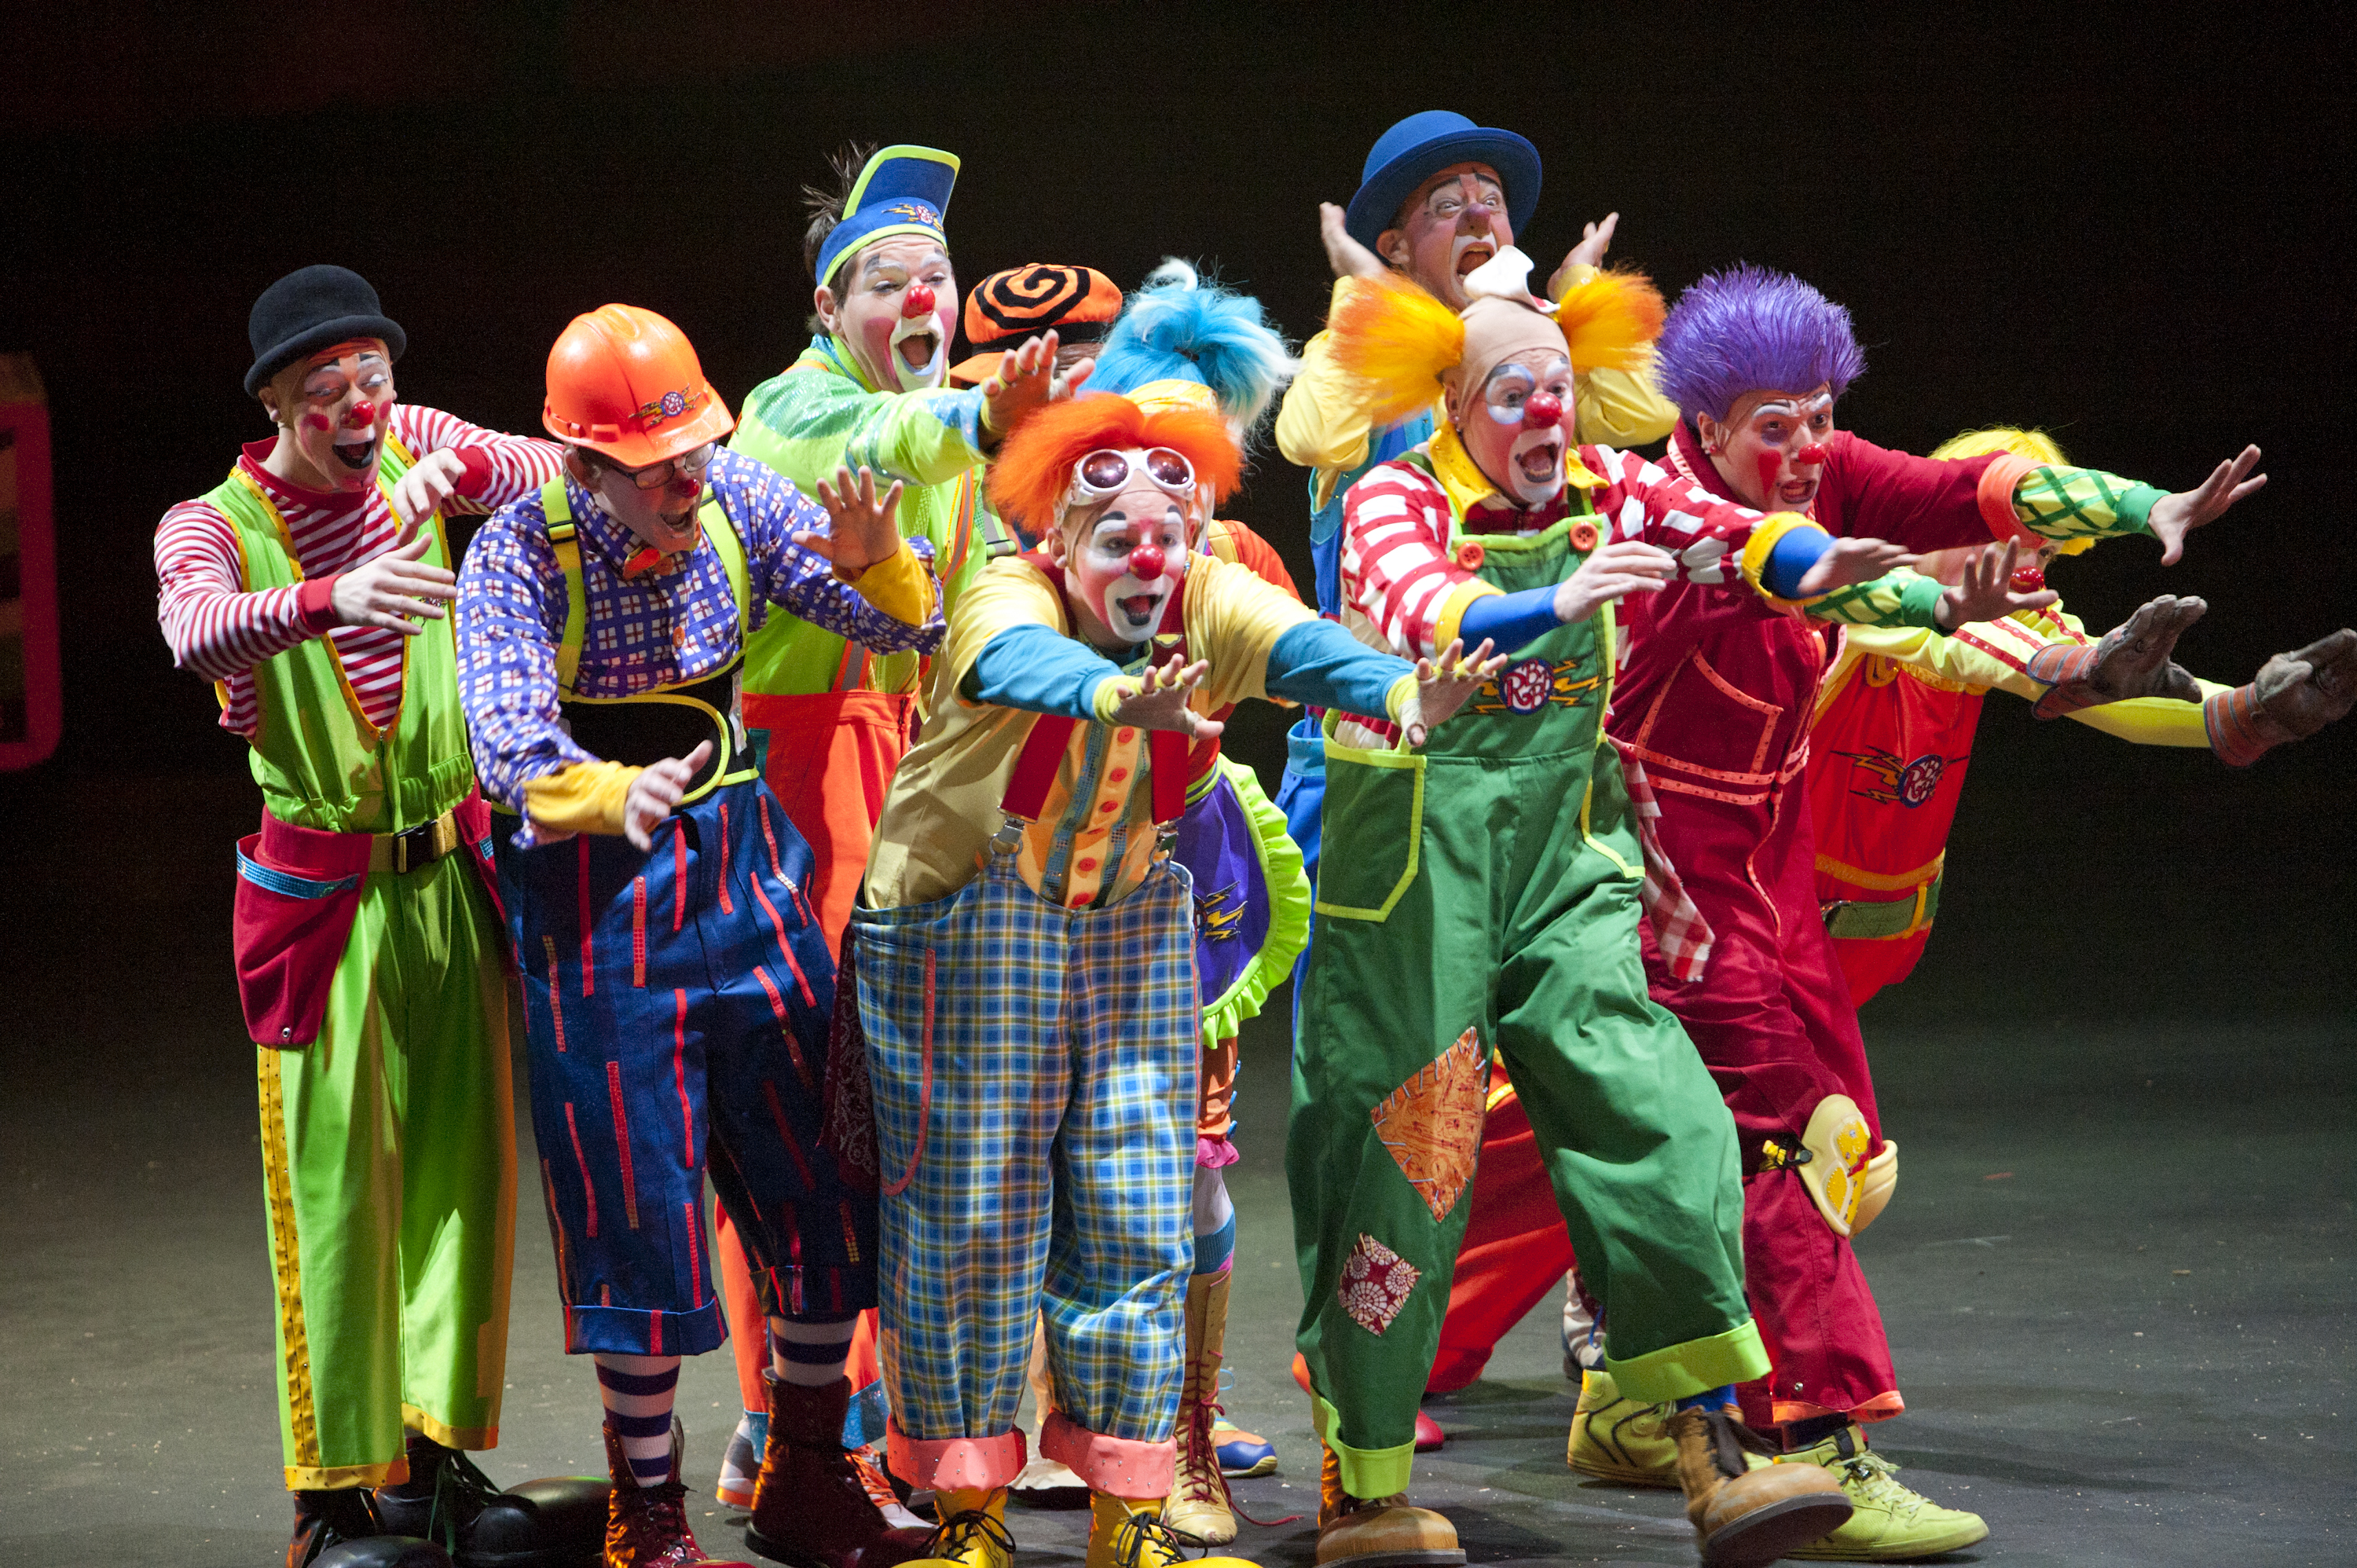 What are some of the duties of circus clowns?